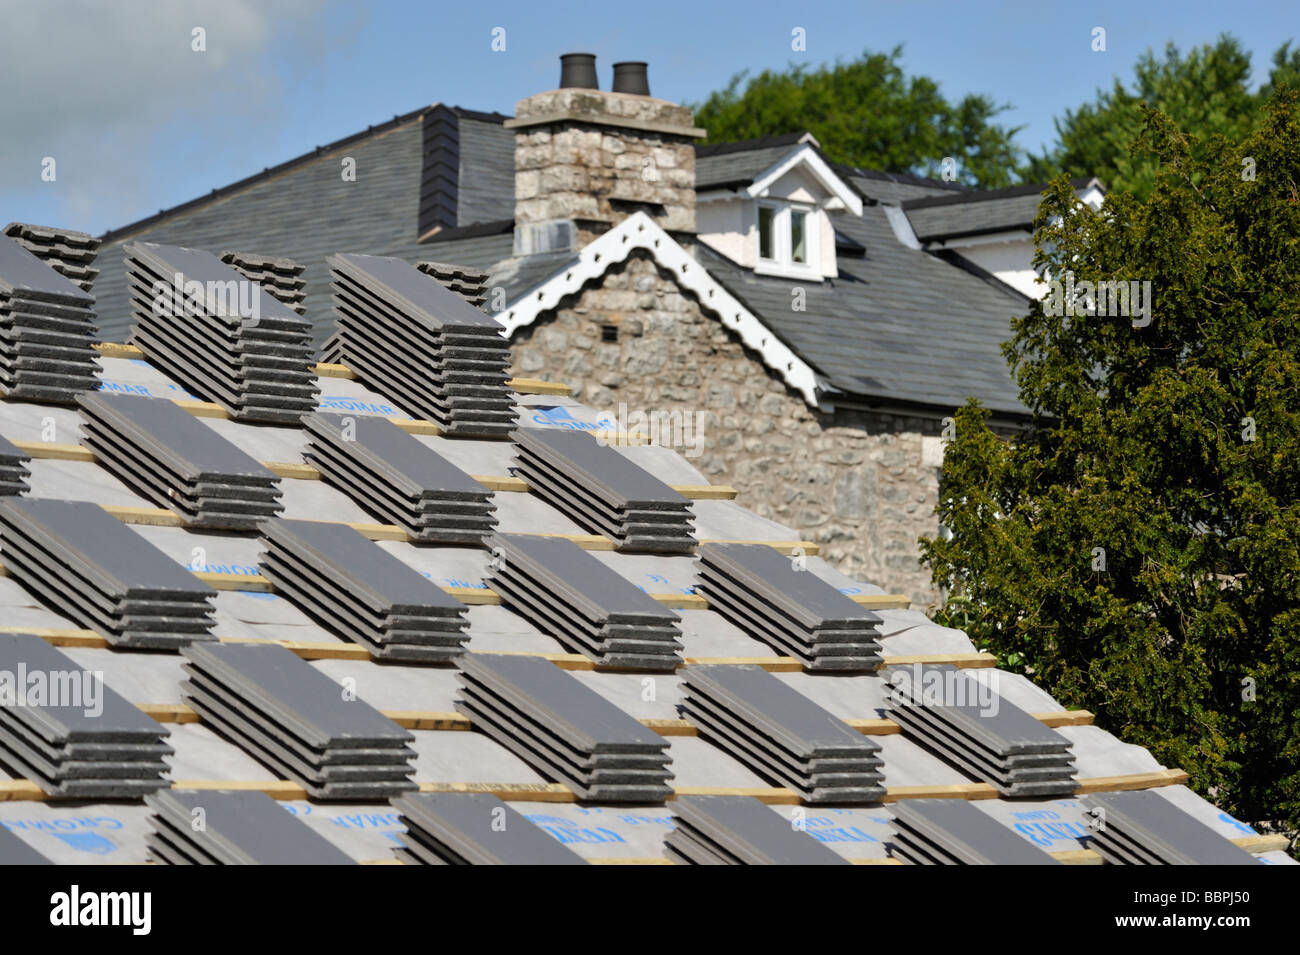 Roofing slates, stacked on roof, prior to re-roofing house. Stock Photo